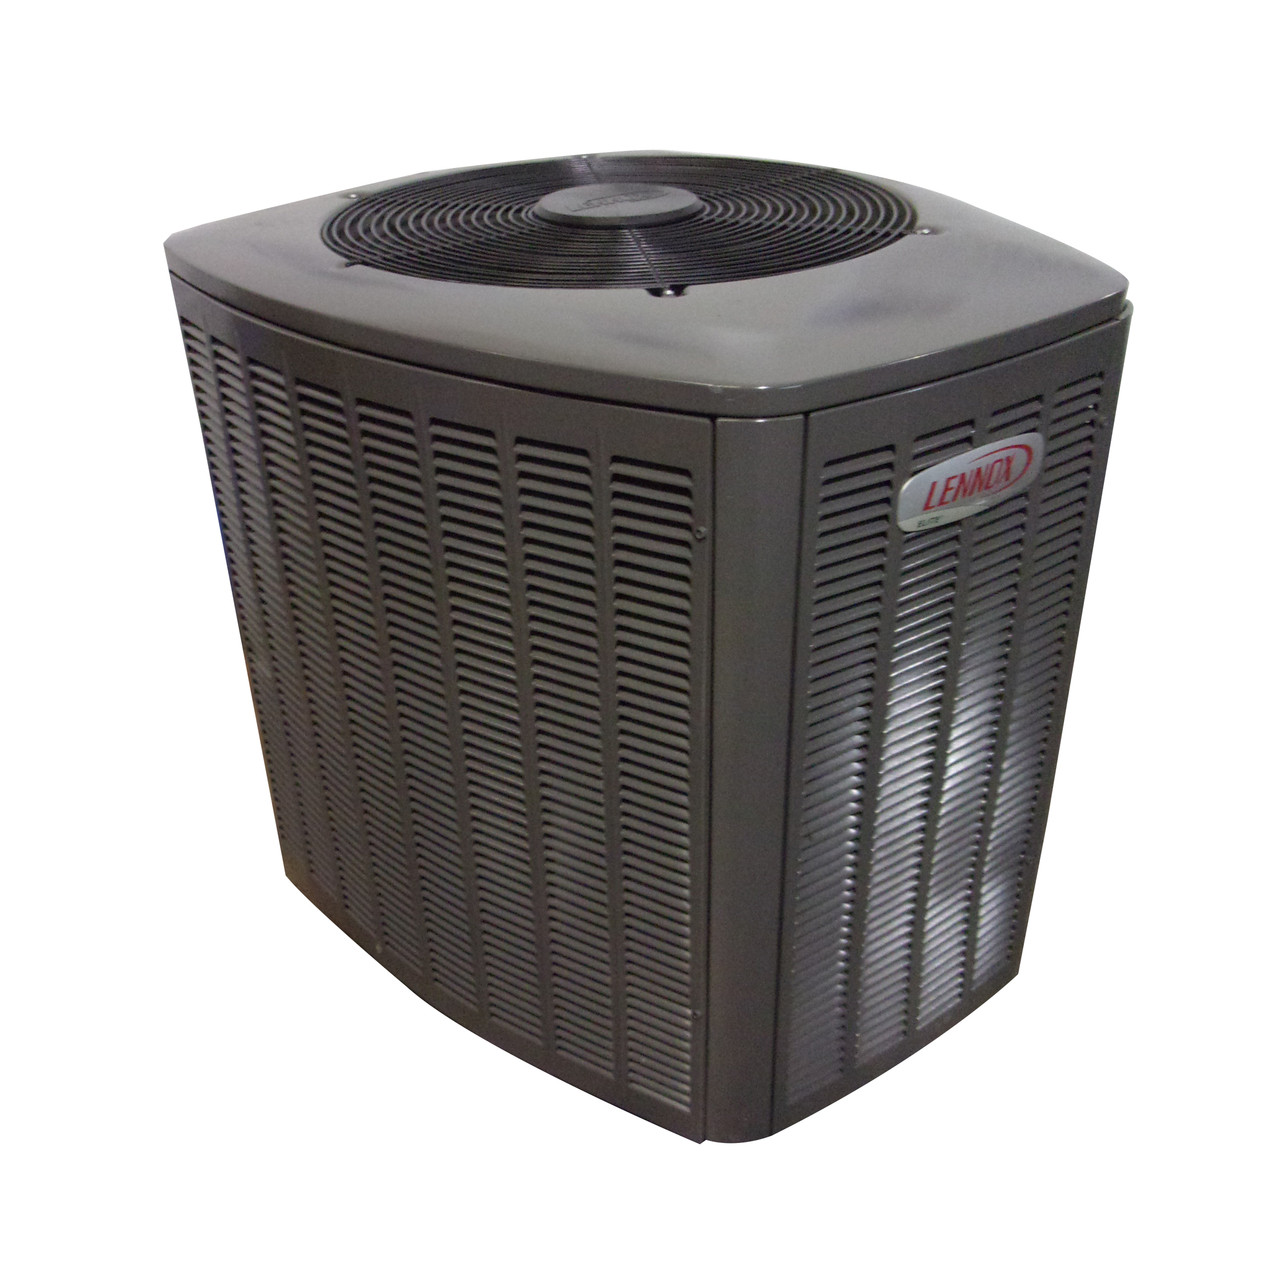 LENNOX Used Central Air Conditioner Condenser XC14